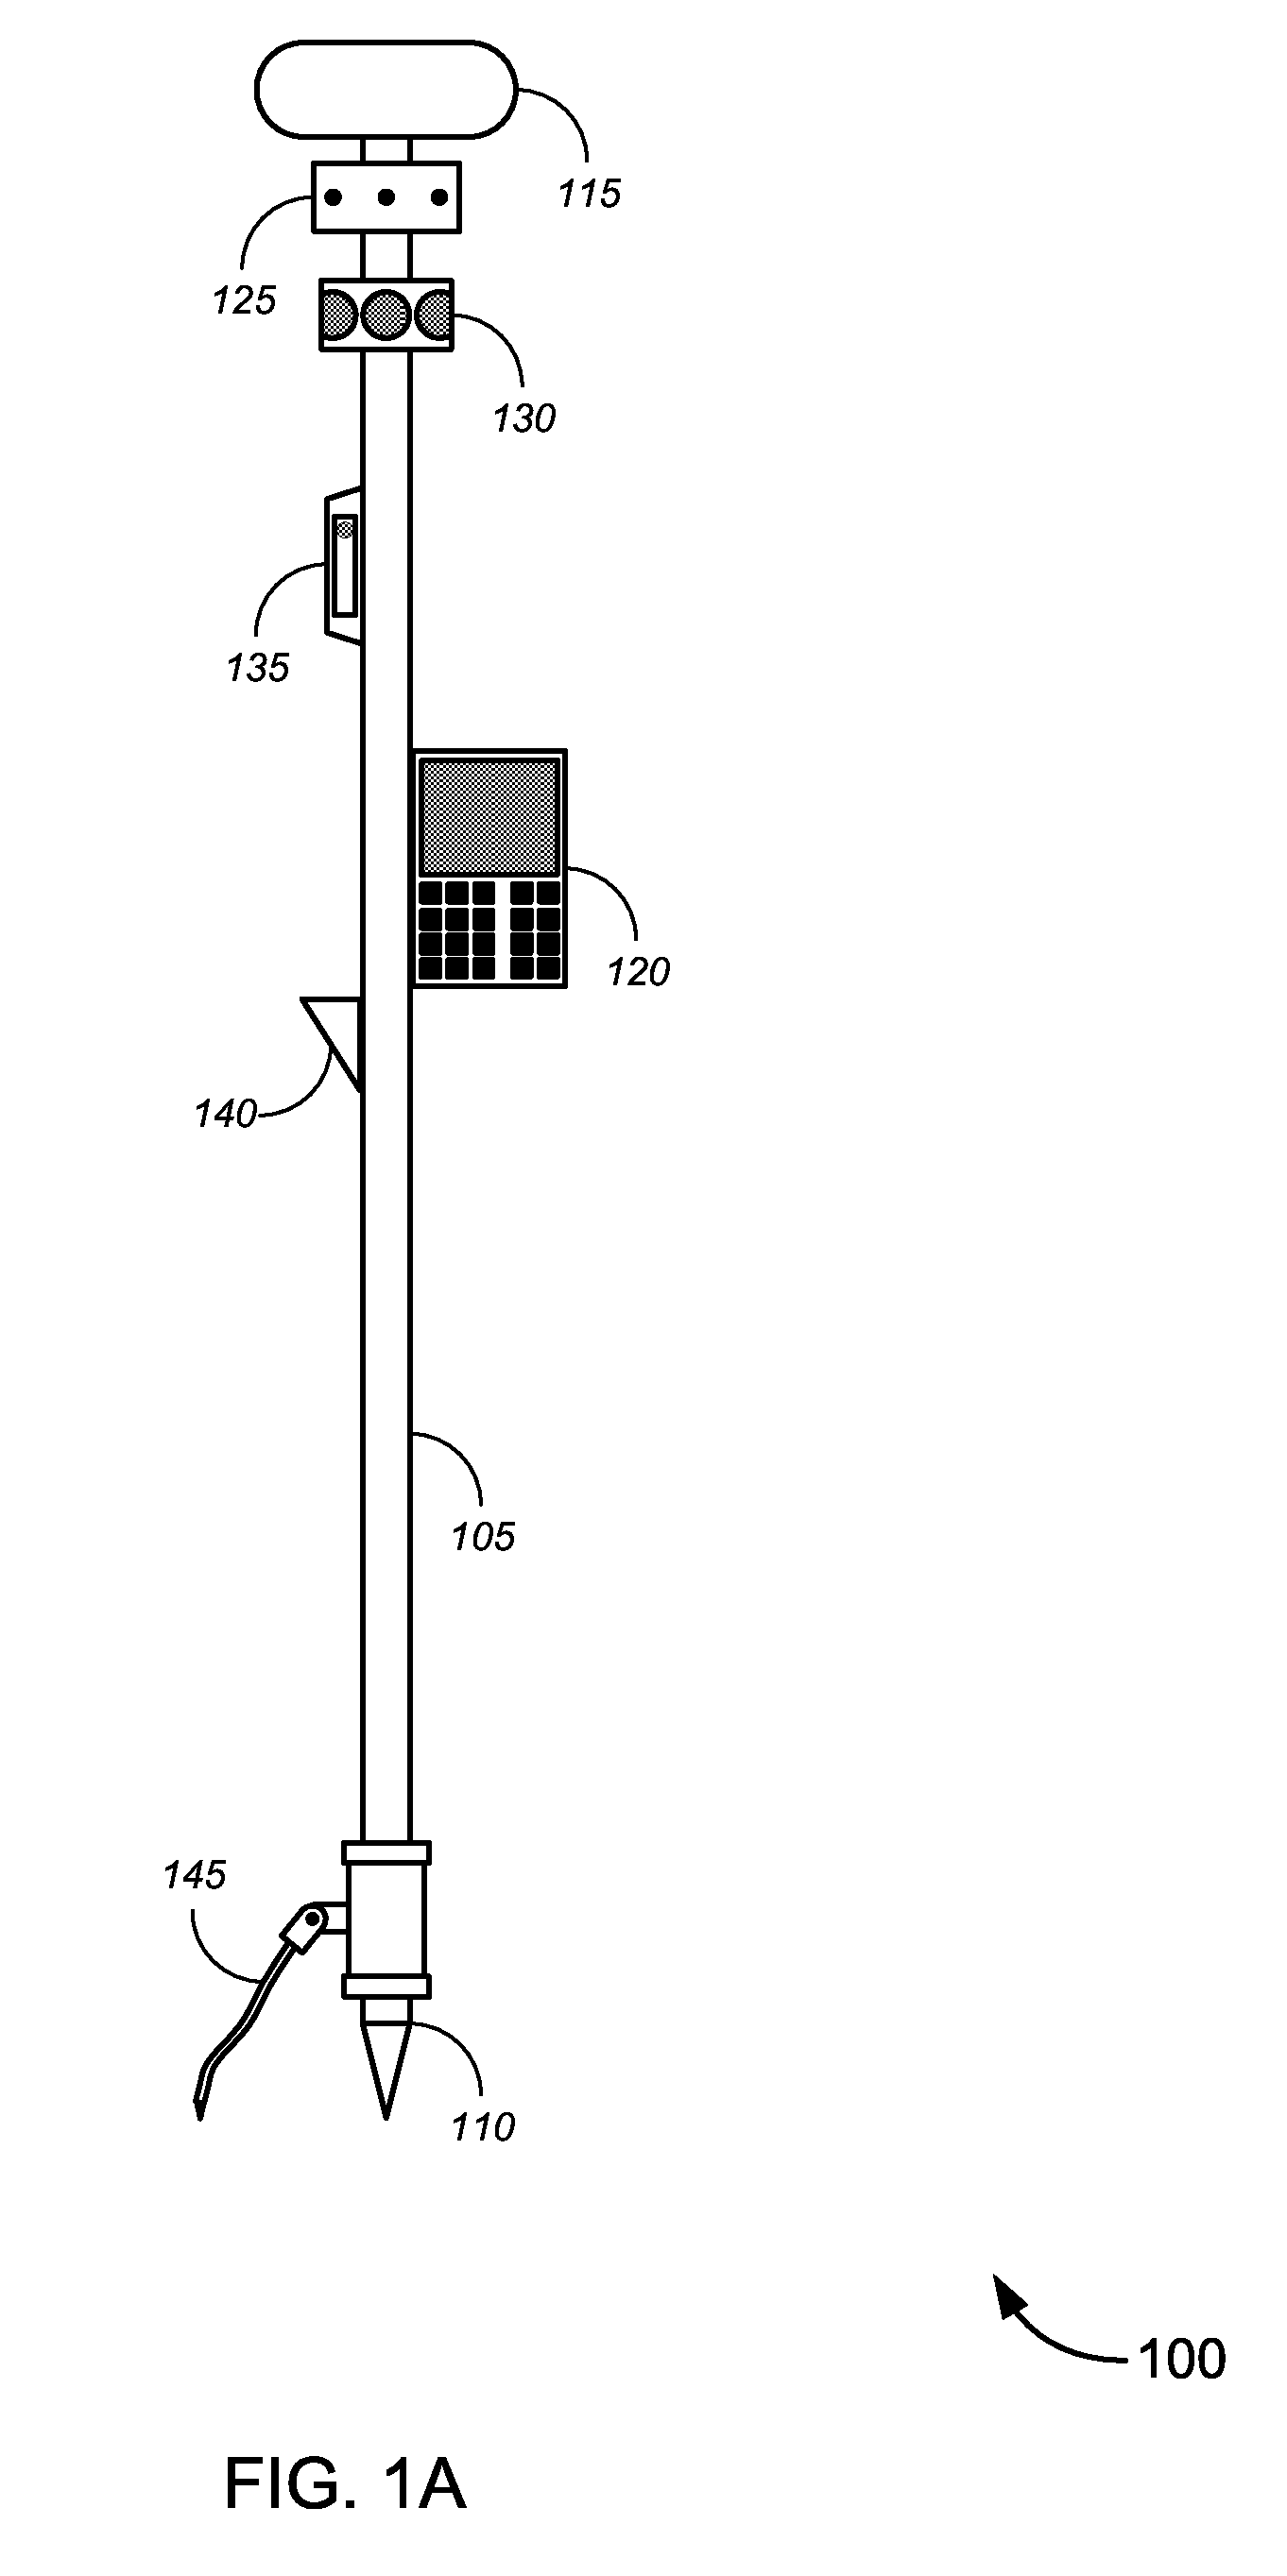 Enhanced position measurement systems and methods